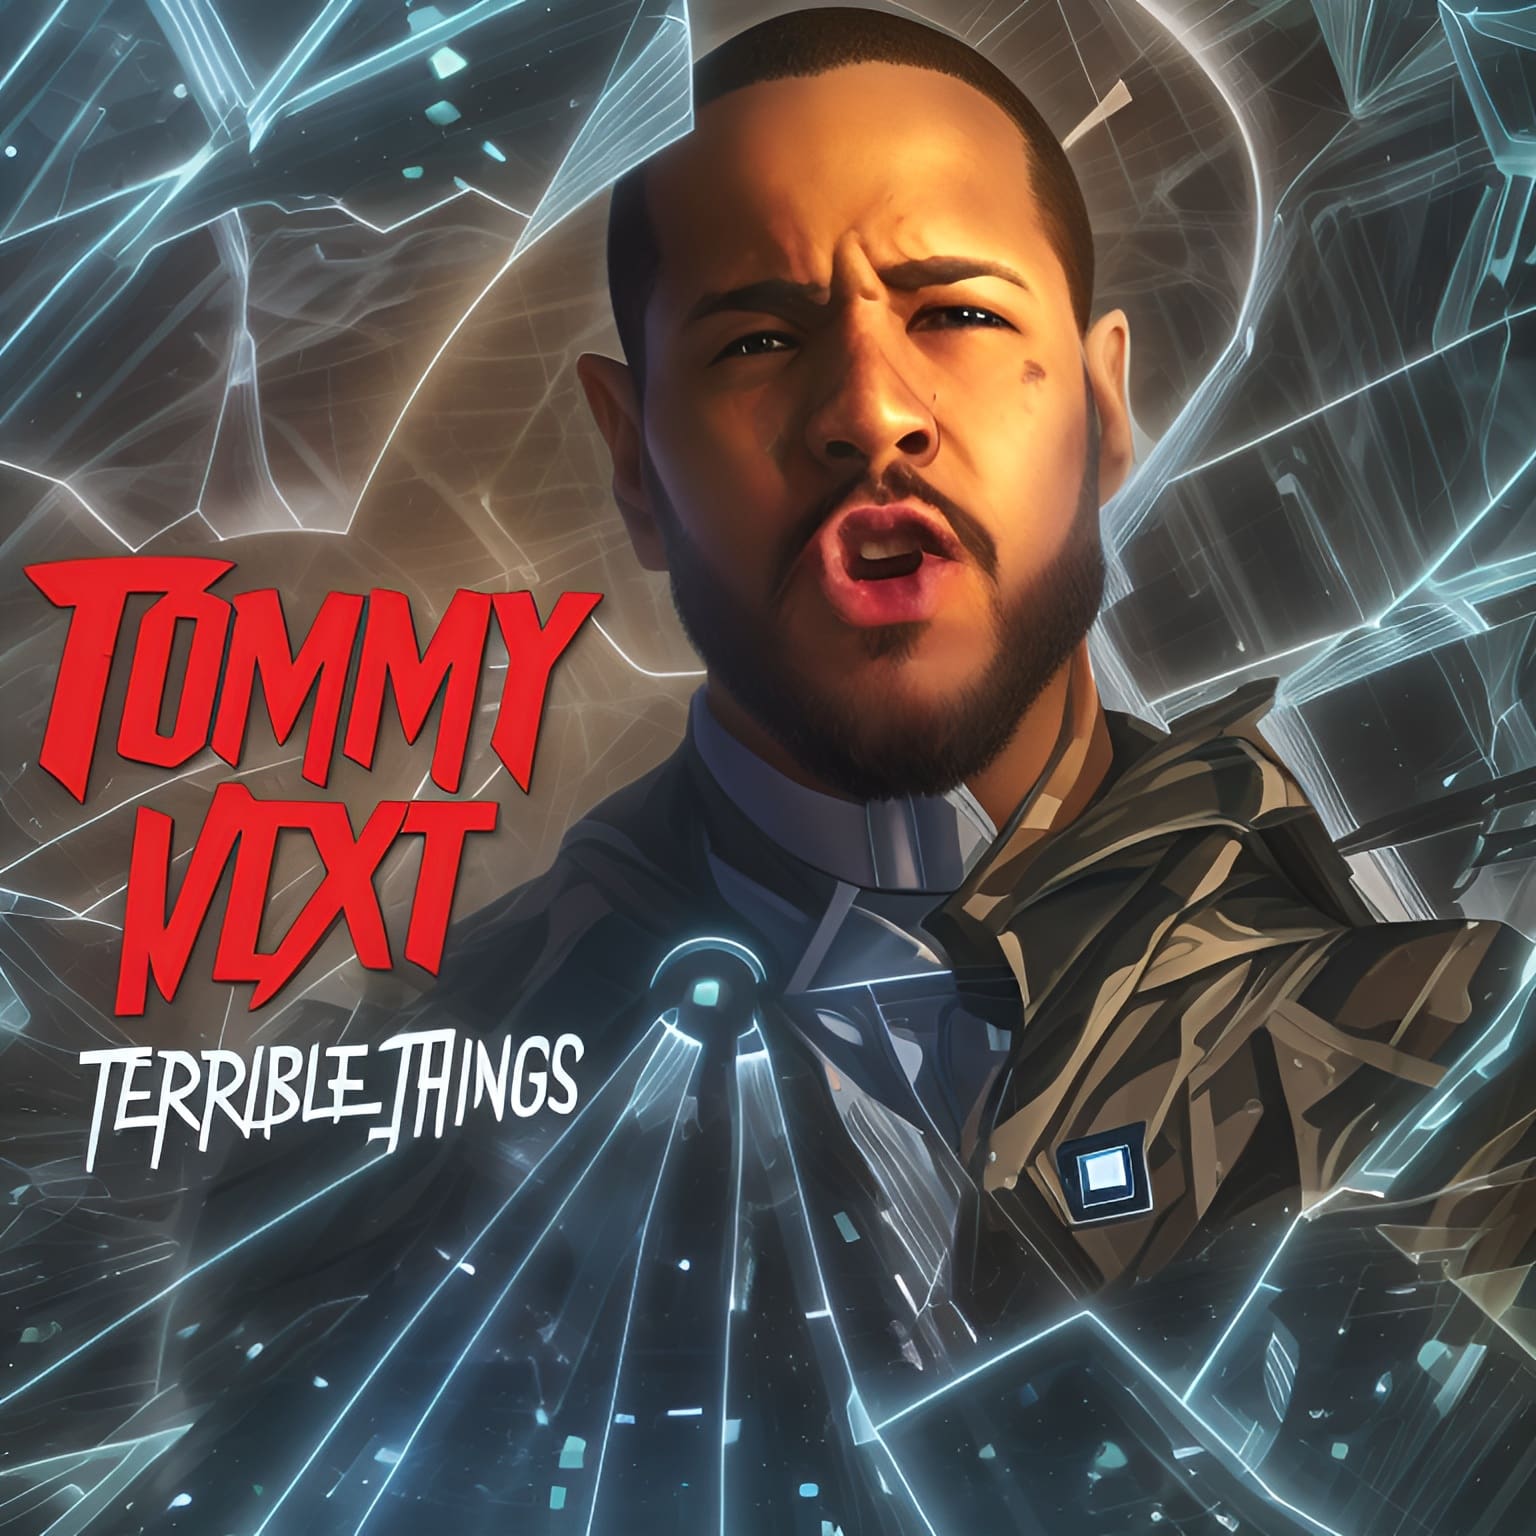 Terrible Things - Tommy Vext Cover